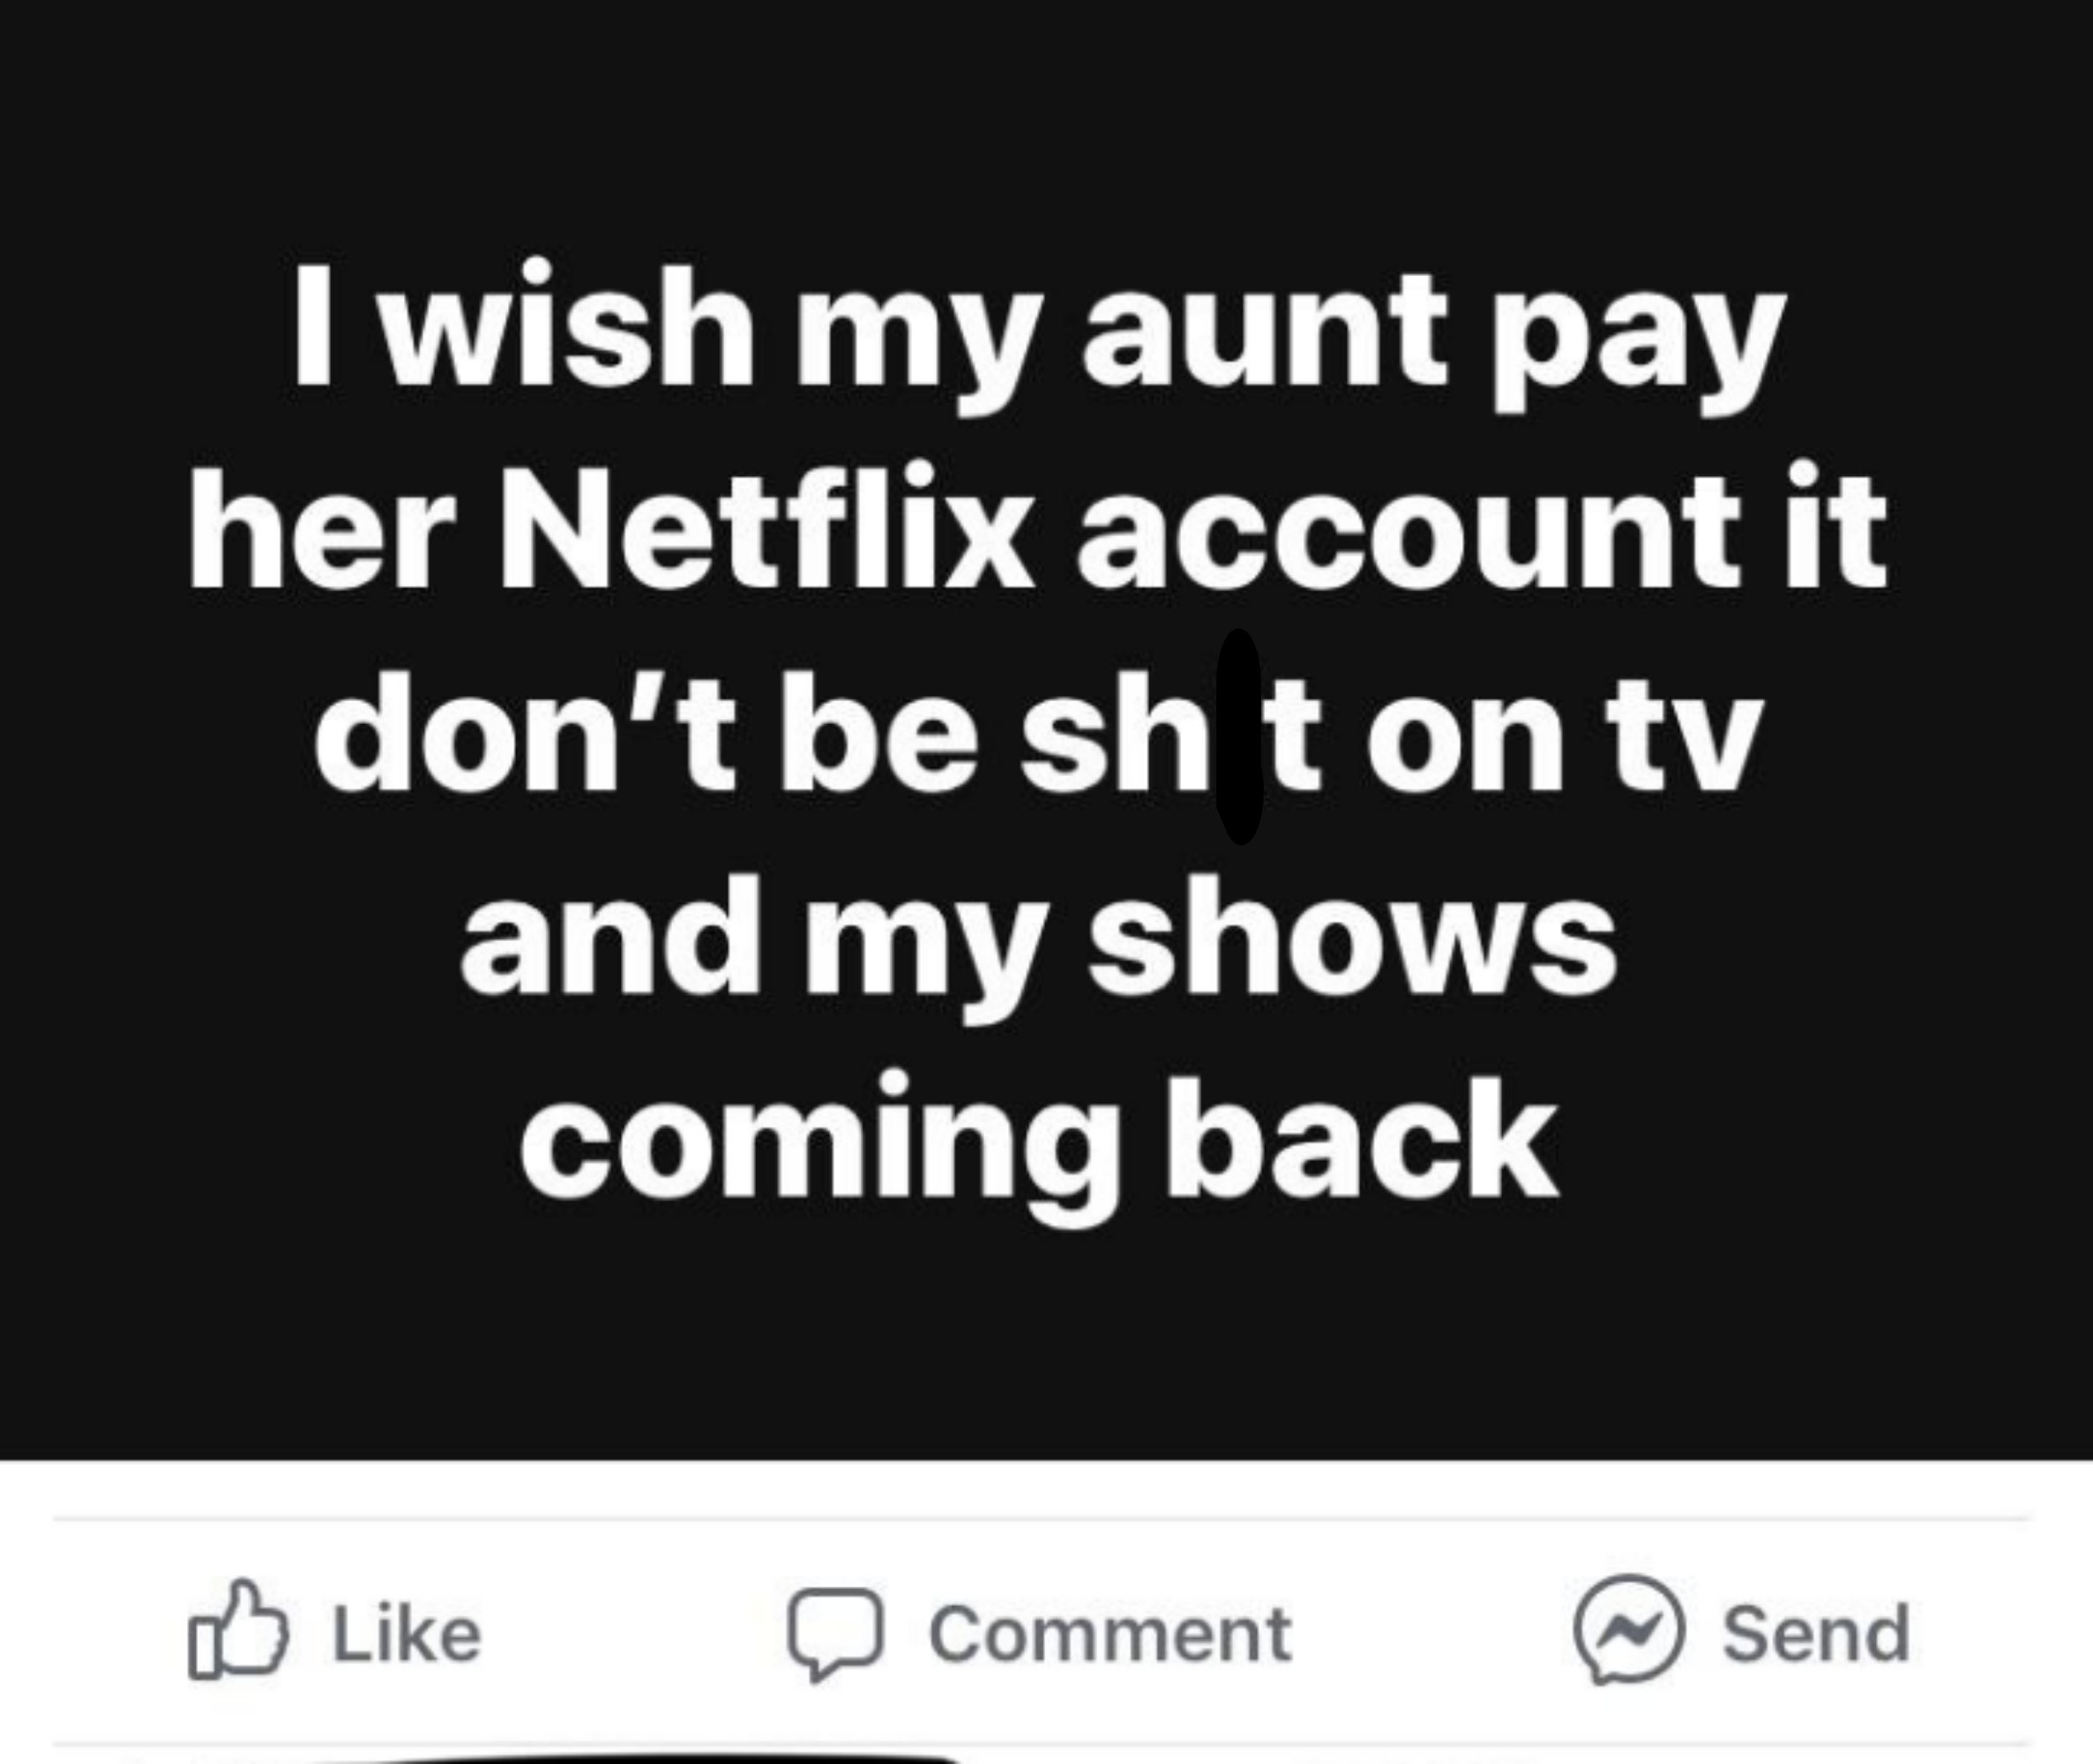 Someone who posted they wish their aunt would pay for Netflix so she could use her account